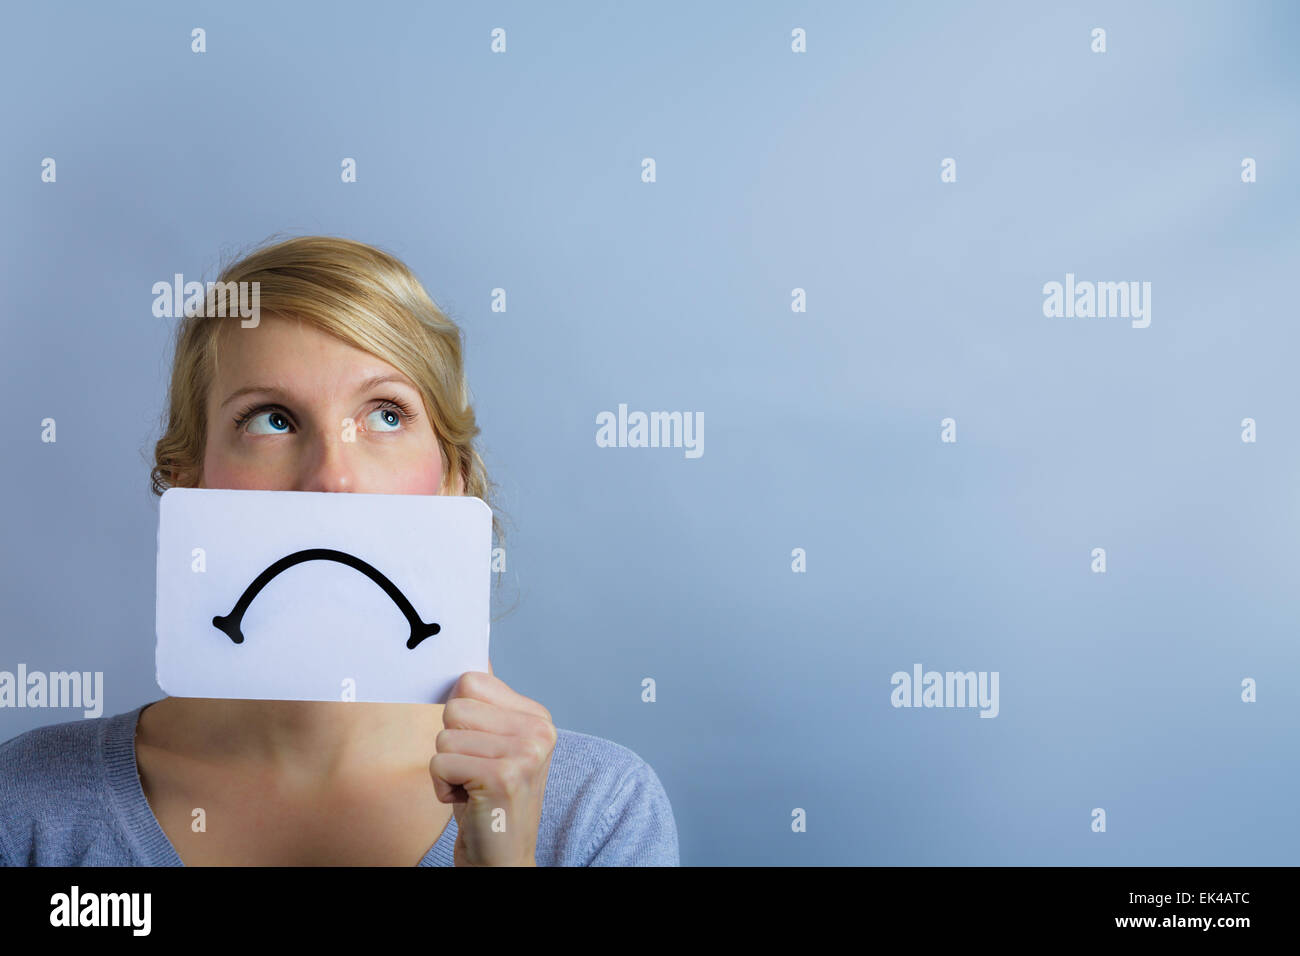 Unhappy Portrait of a Woman Holding a Sad Mood Board with Blue Background Stock Photo